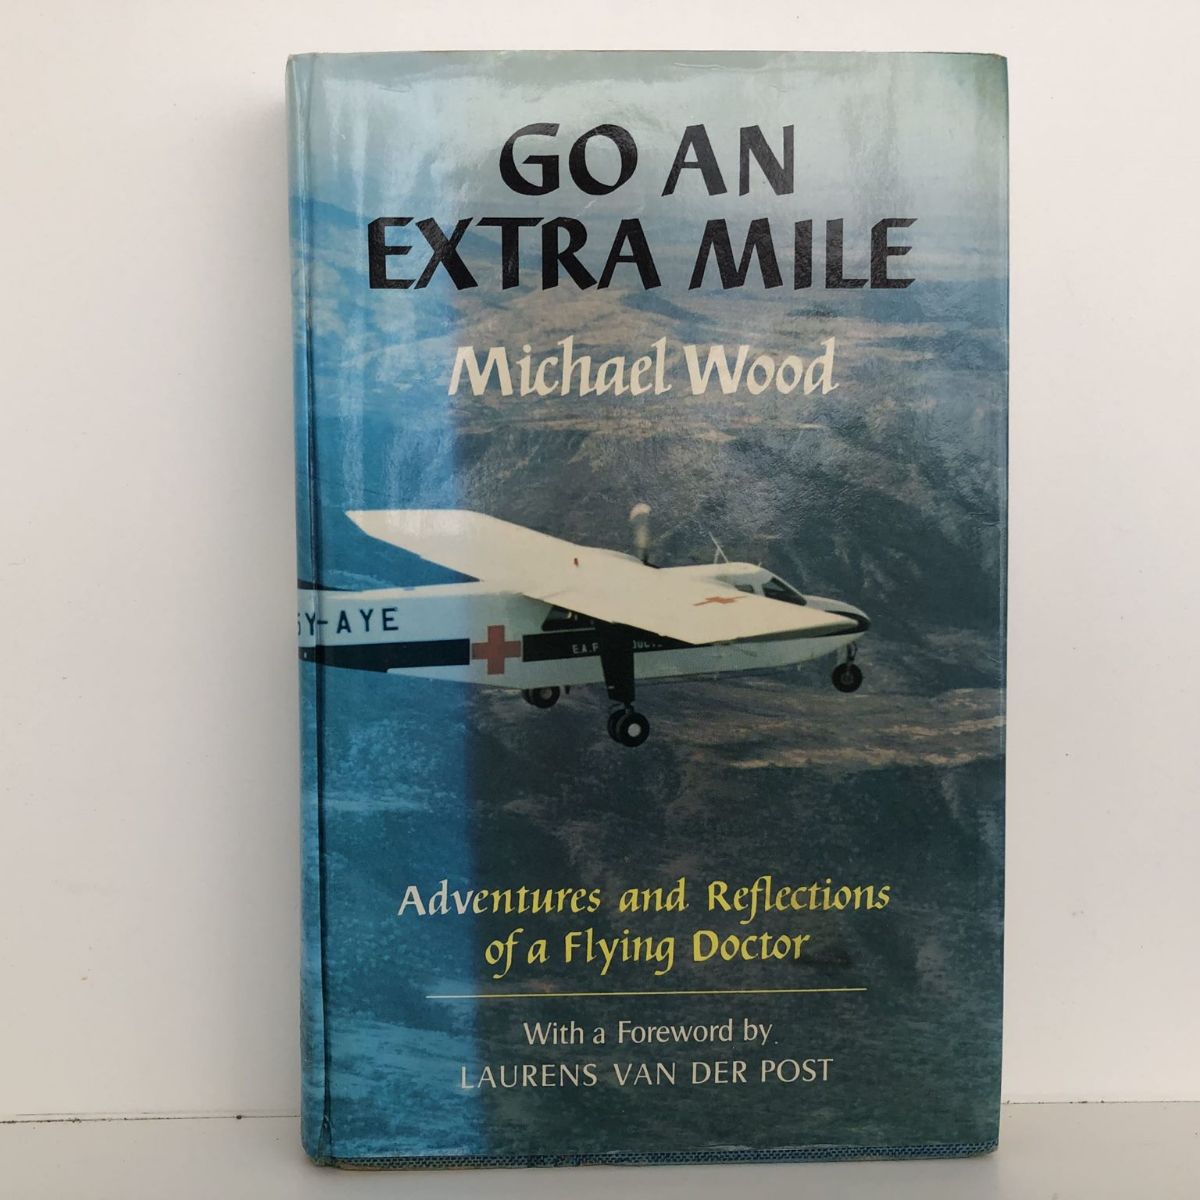 GO AN EXTRA MILE: The Adventures and Reflections of a Flying Doctor